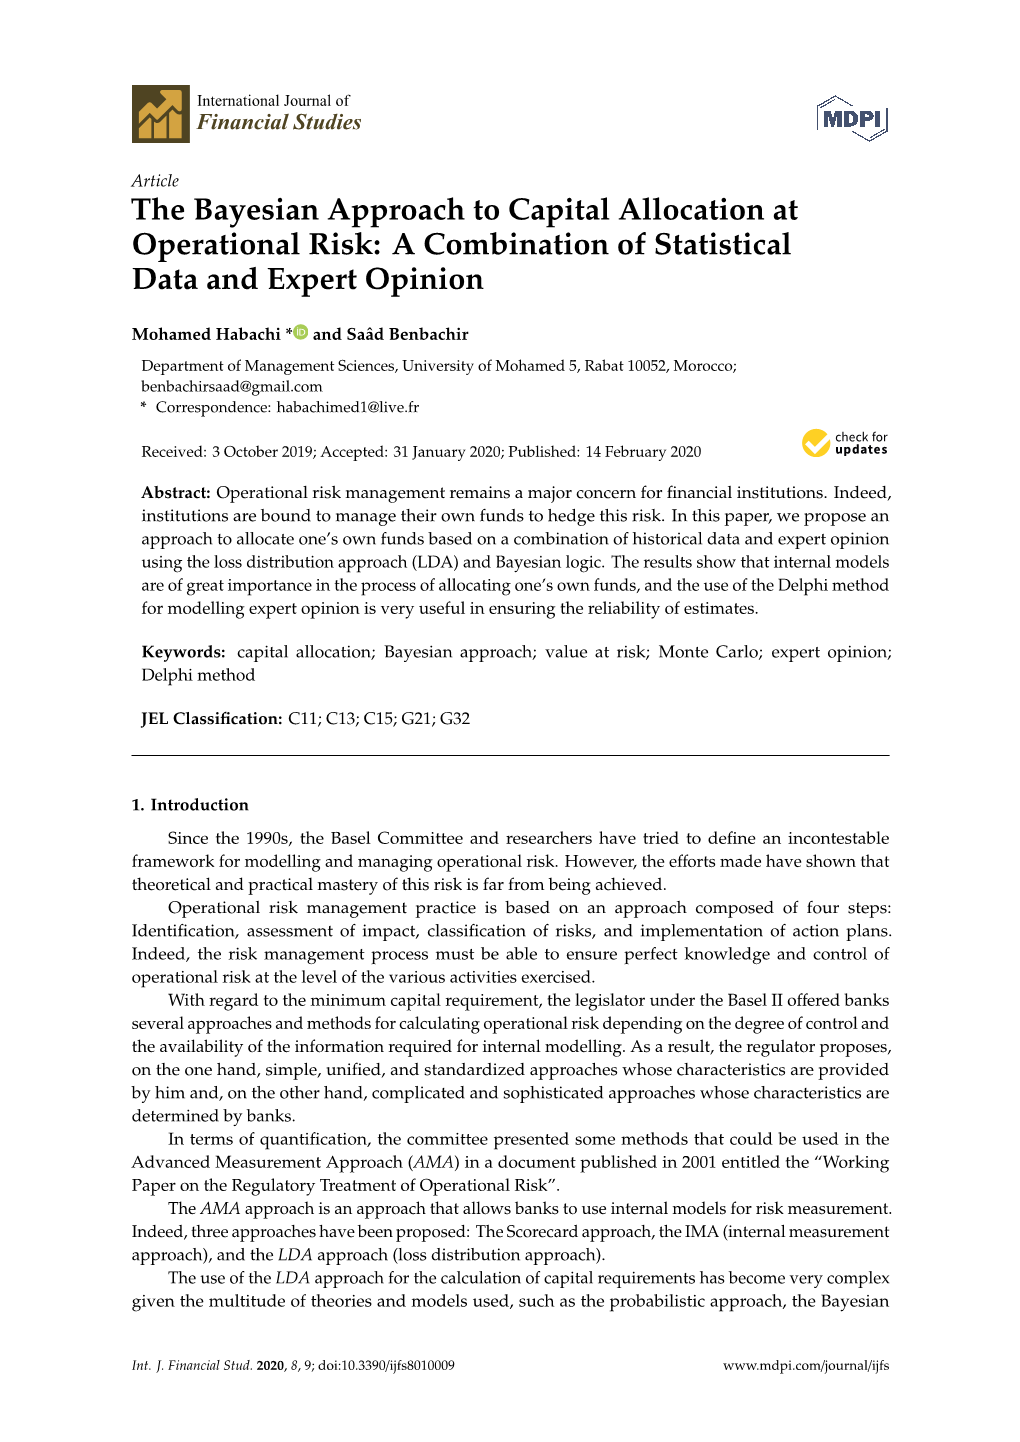 The Bayesian Approach to Capital Allocation at Operational Risk: a Combination of Statistical Data and Expert Opinion